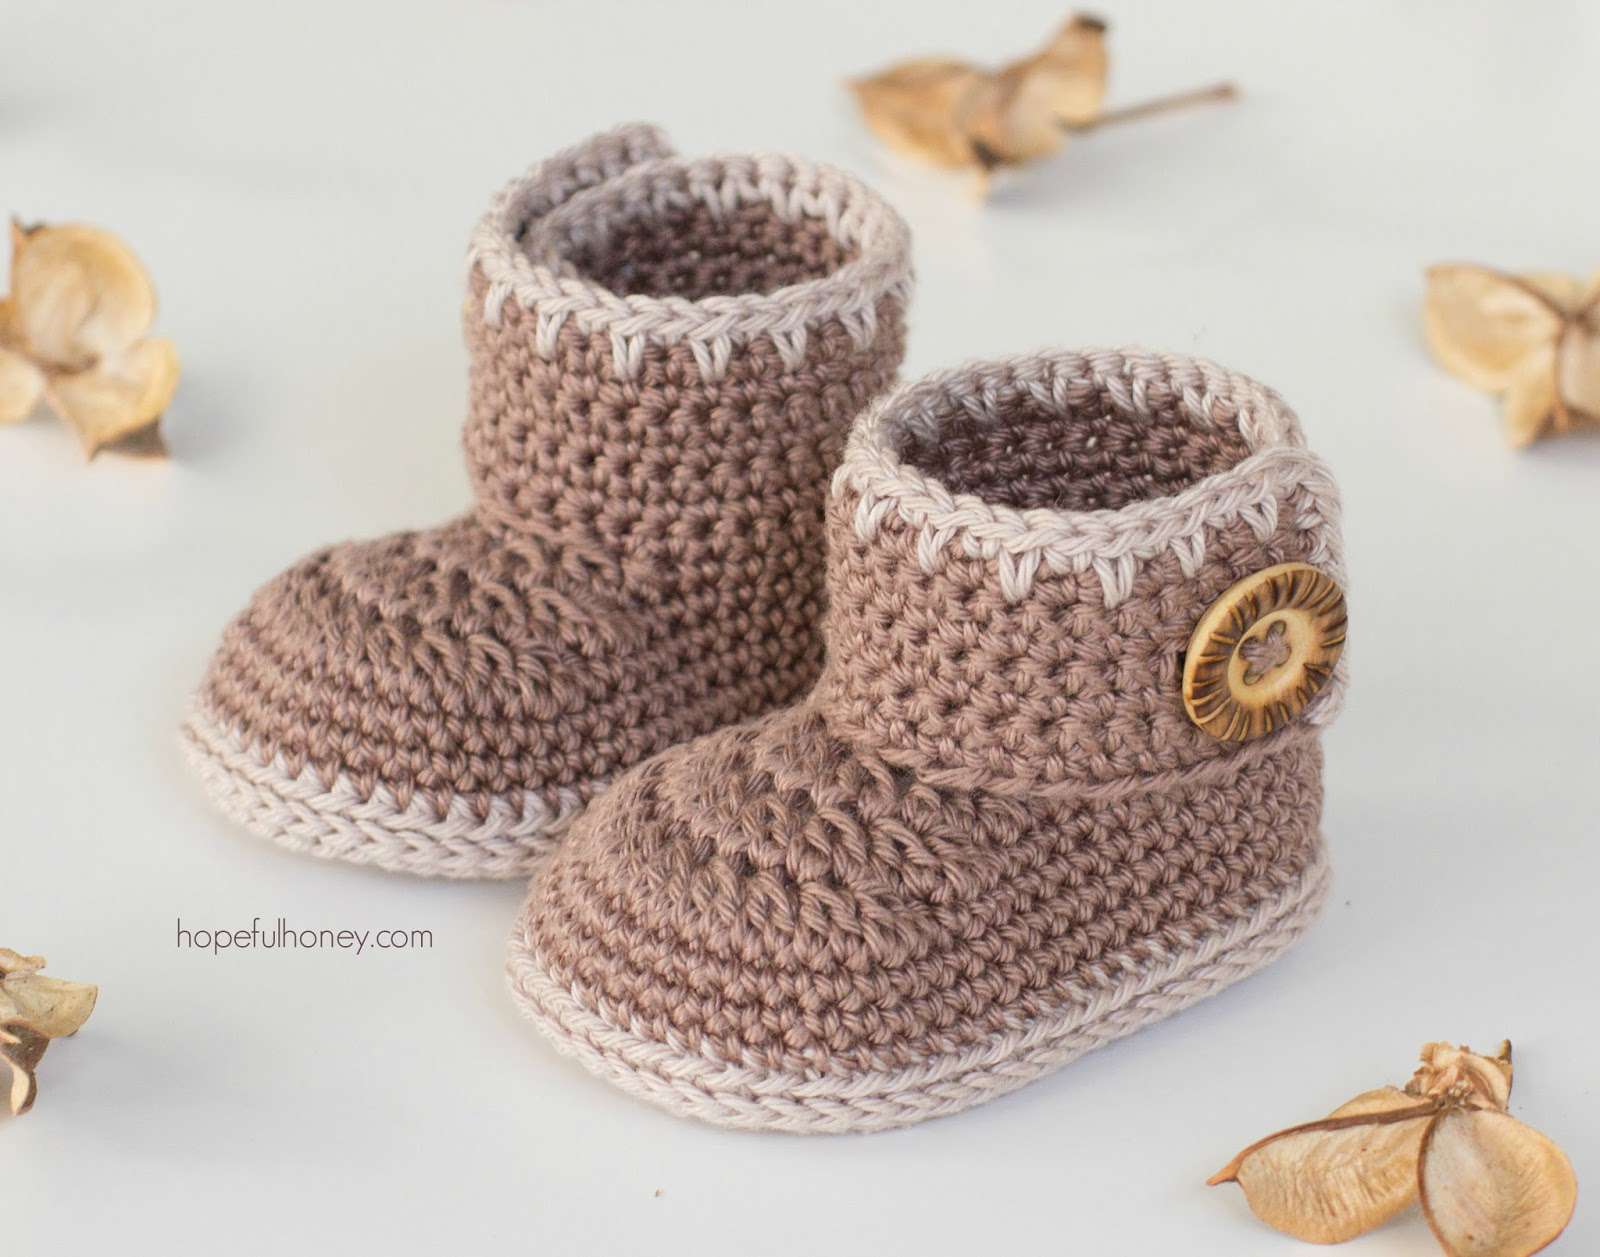 Crochet Patterns For Baby 15 Adorable Ba Bootie Crochet Patterns